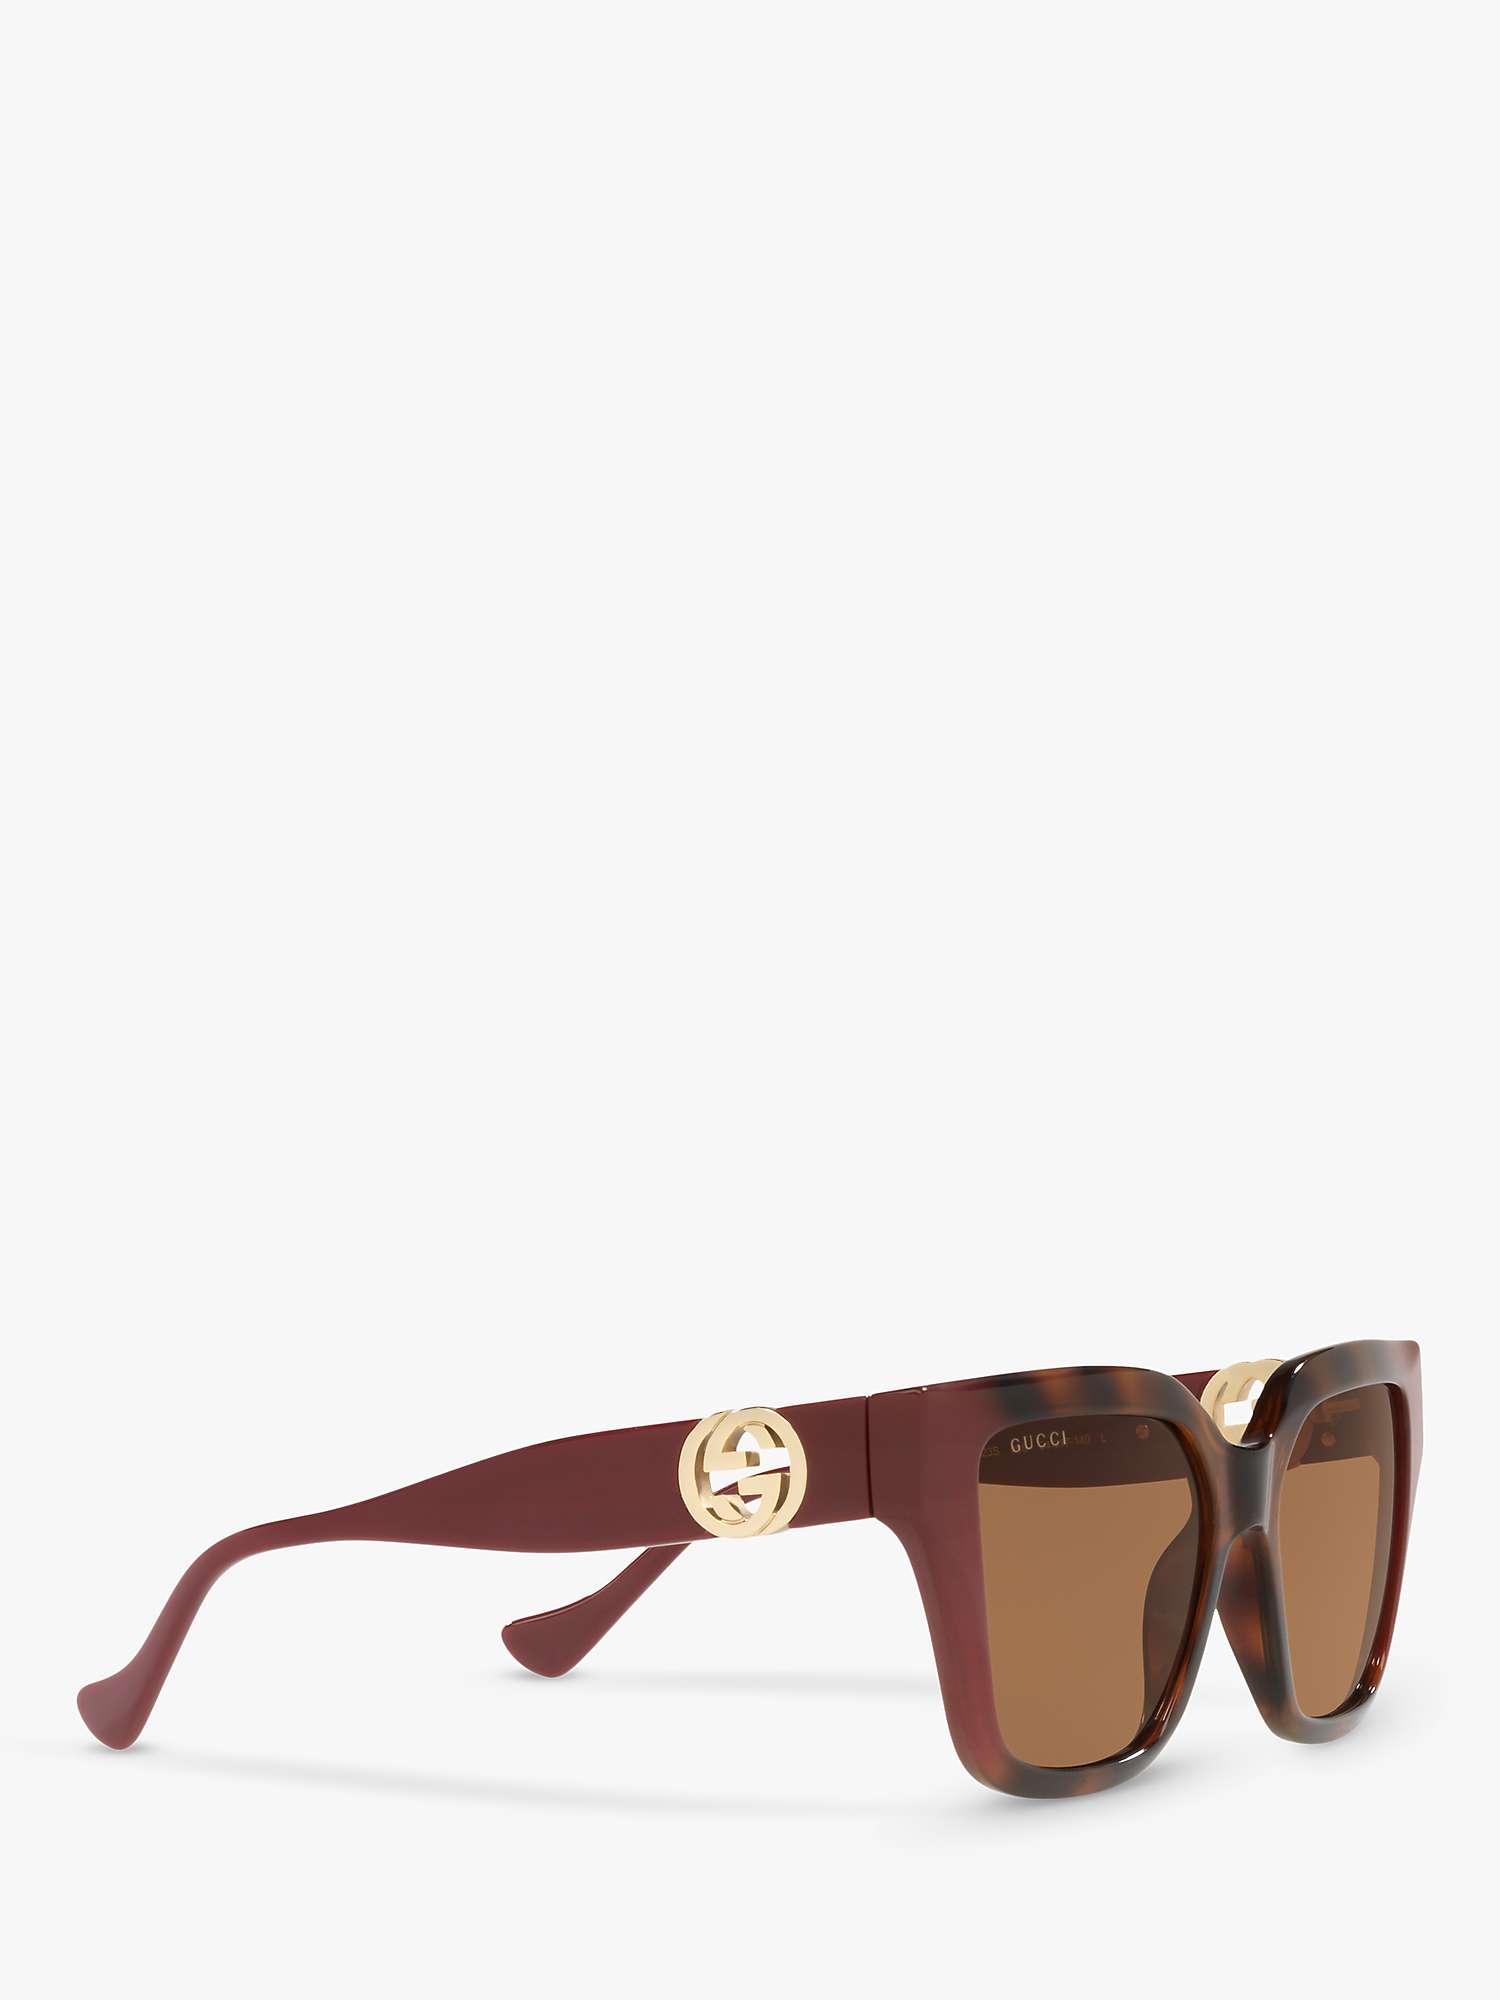 Buy Gucci GG1023S Women's D-Frame Sunglasses, Brown Red/Brown Online at johnlewis.com